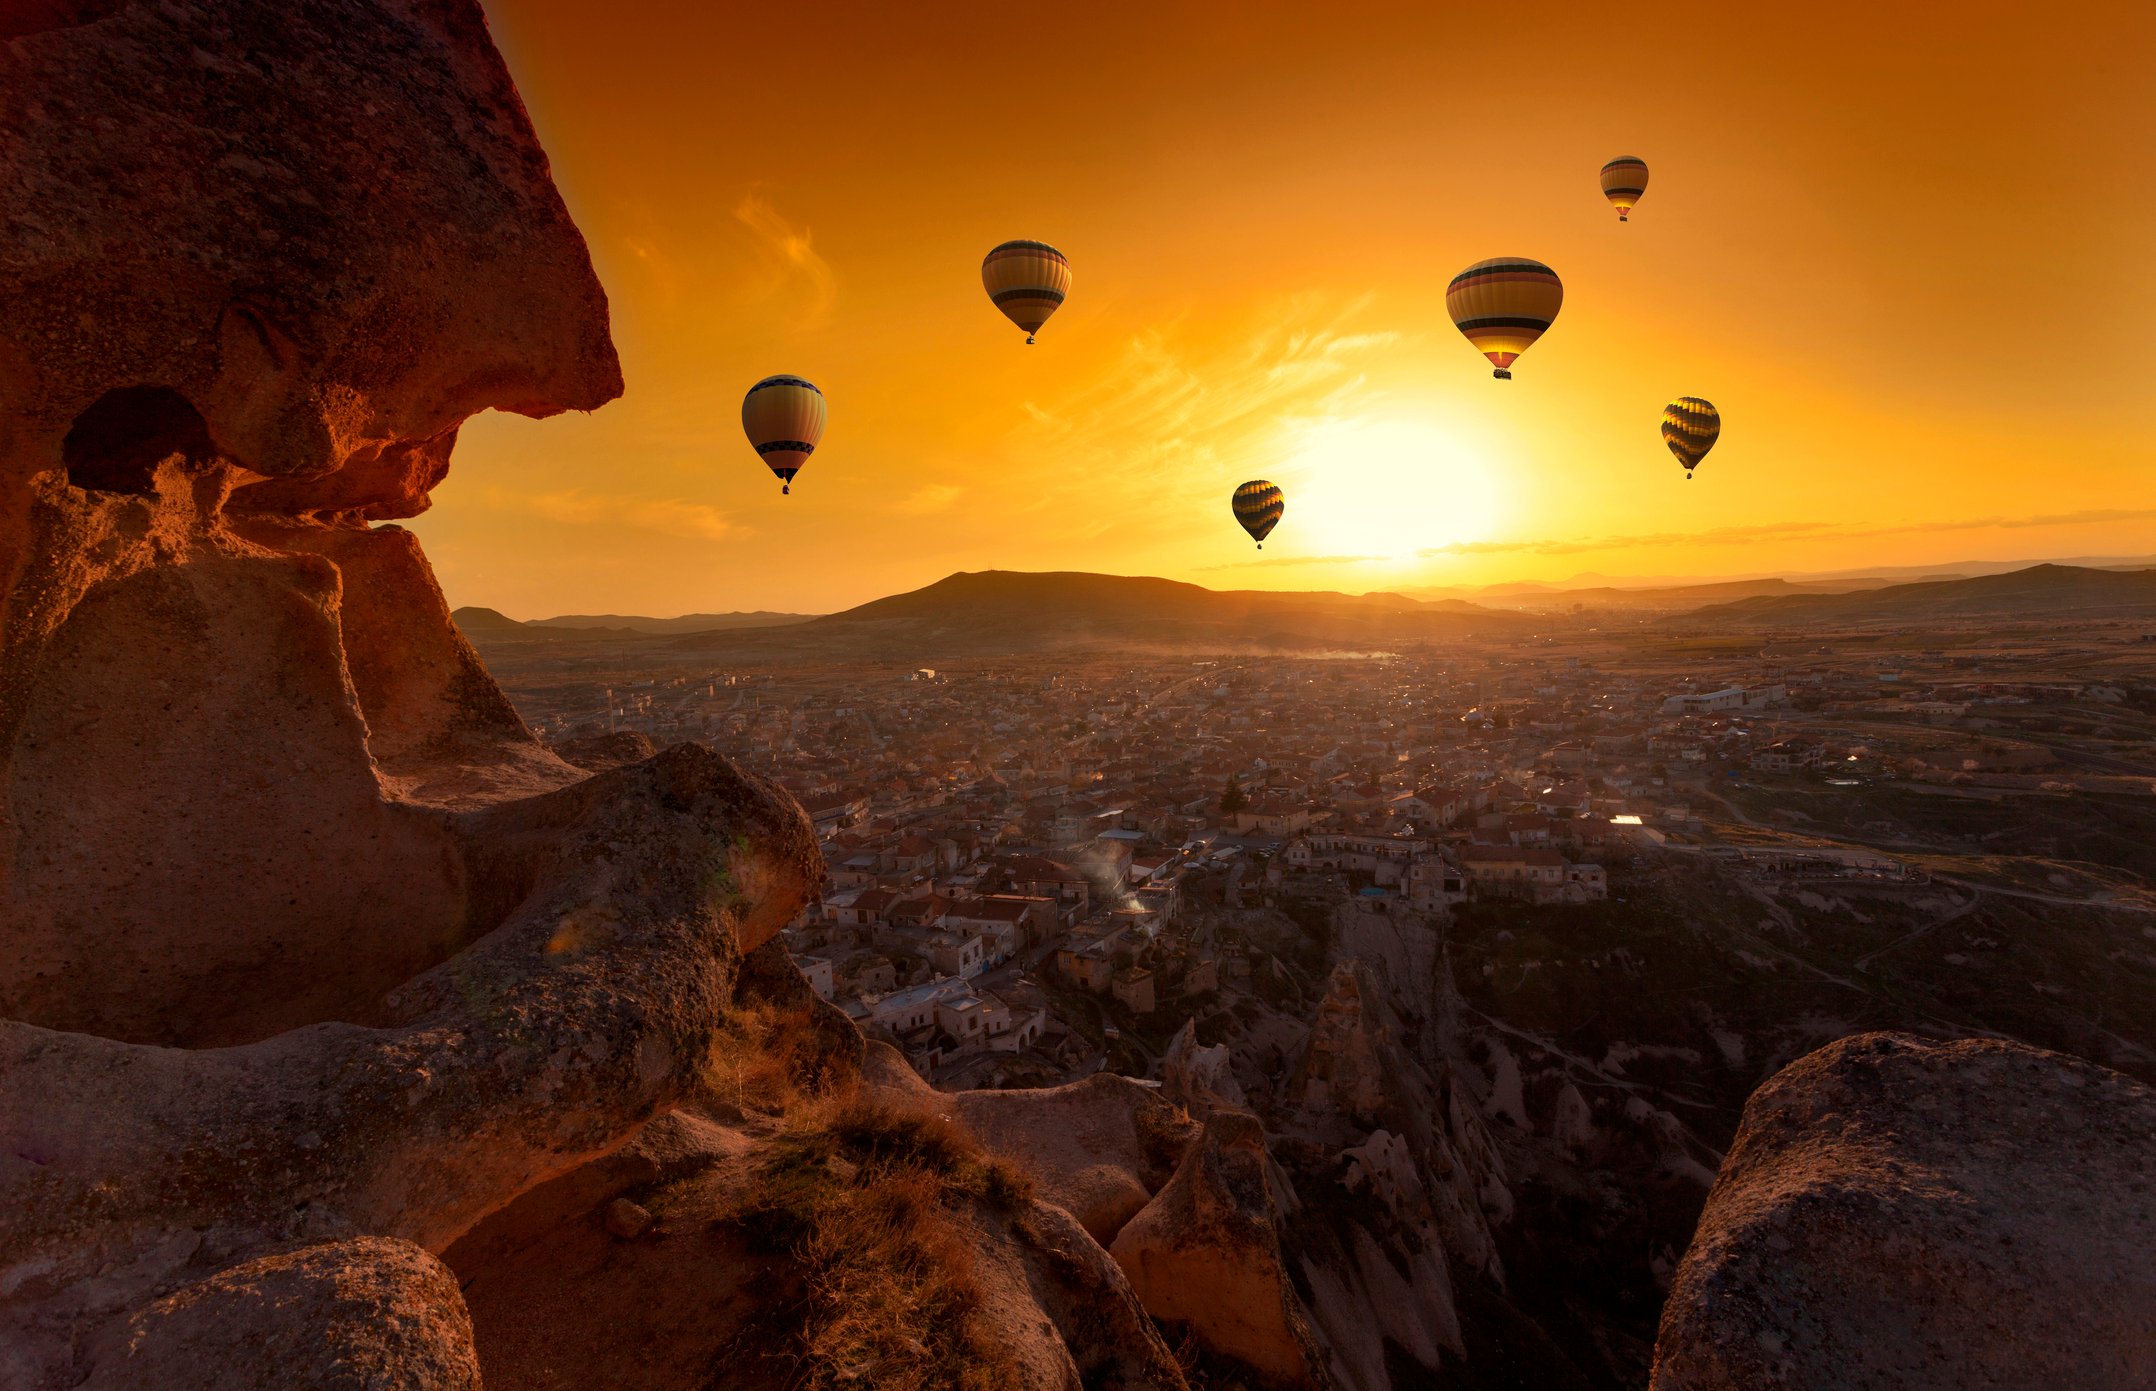 World heritage in Turkey: Cappadocia, the magical realm of fairy chimneys and hot air balloon rides | Daily Sabah